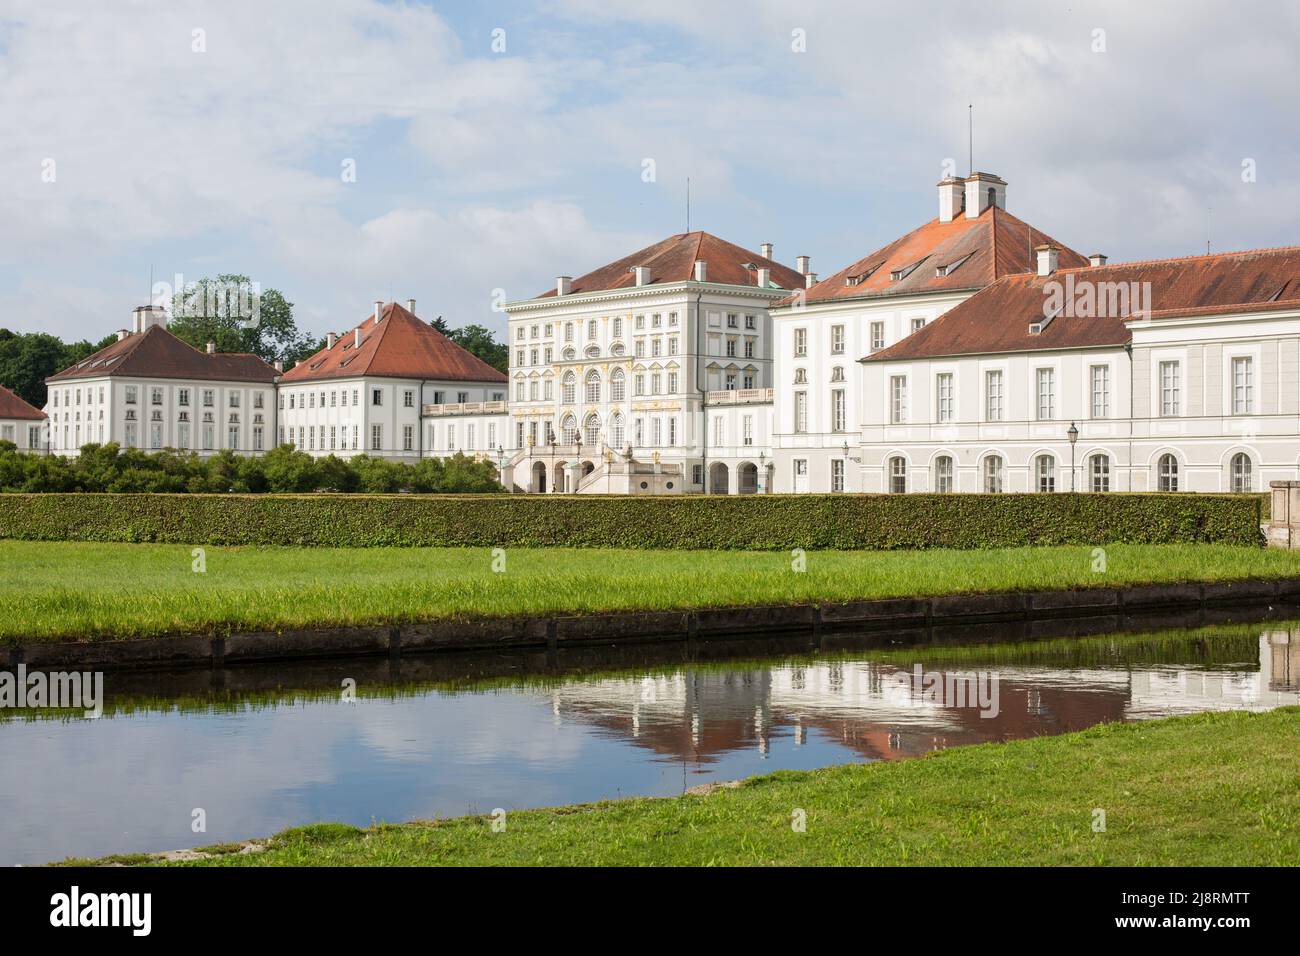 Munich, Germany - Jul 2, 2021: View on the main building of Nymphenburg palace. Meadow and park waters in the foreground. Stock Photo